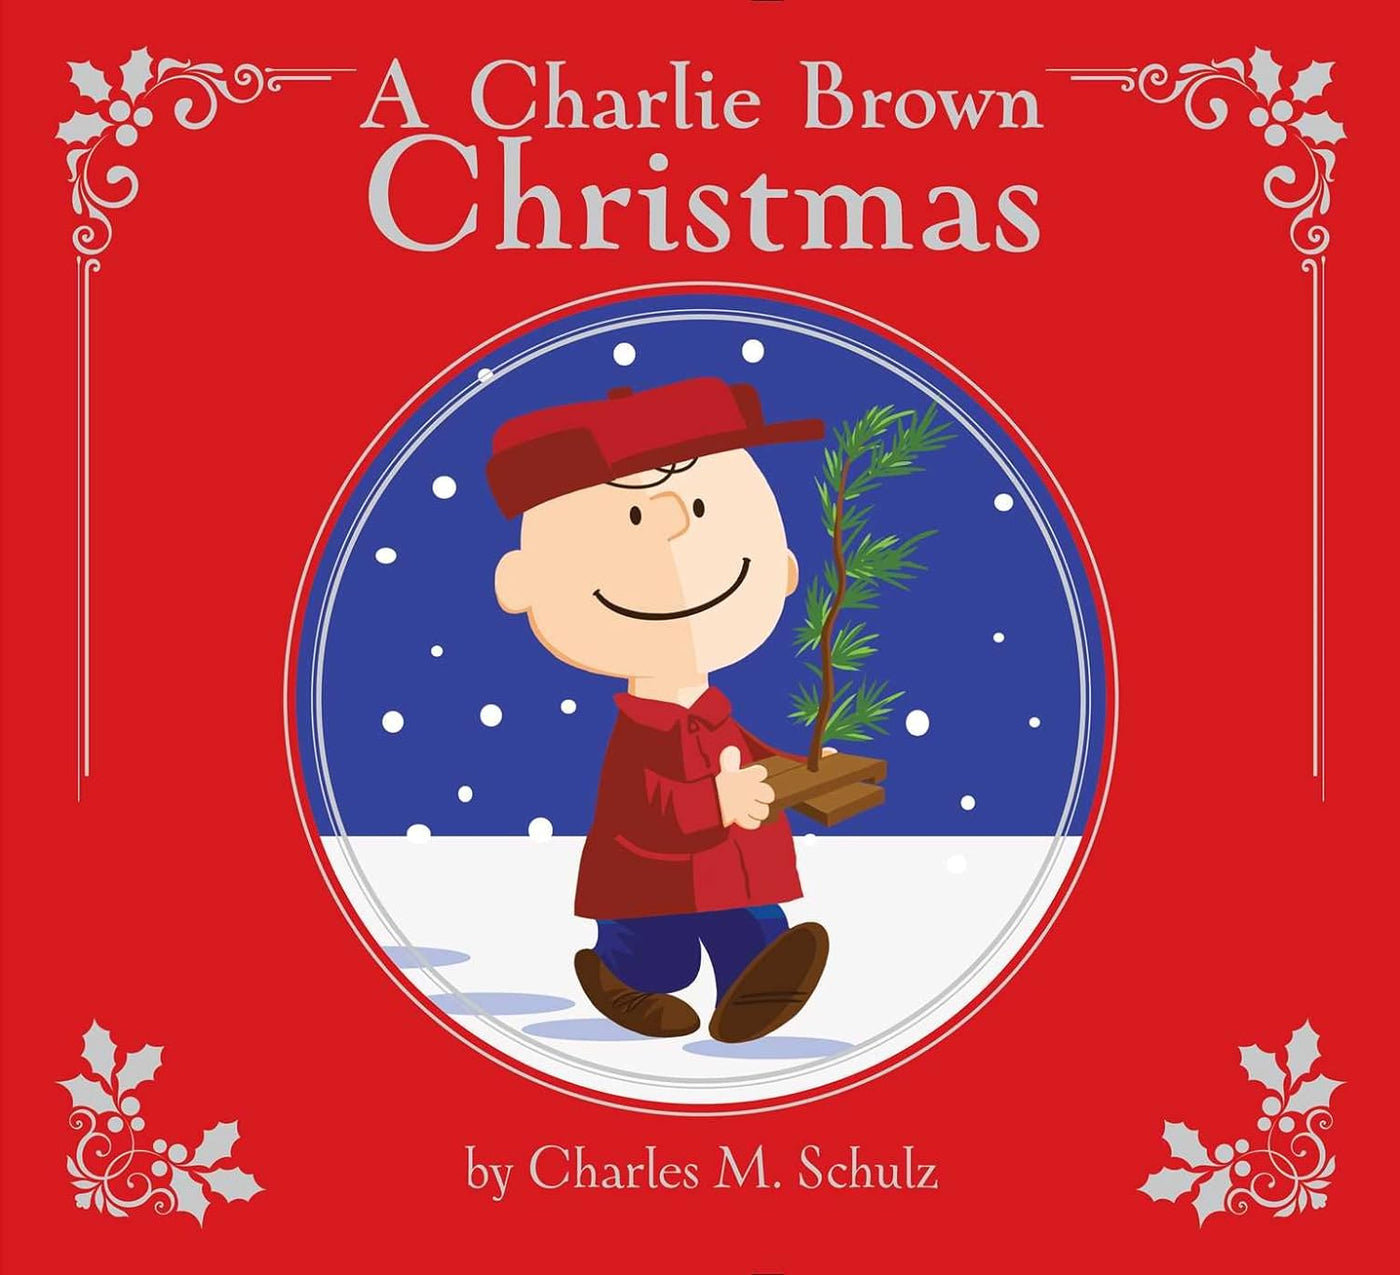 A Charlie Brown Christmas (Deluxe)